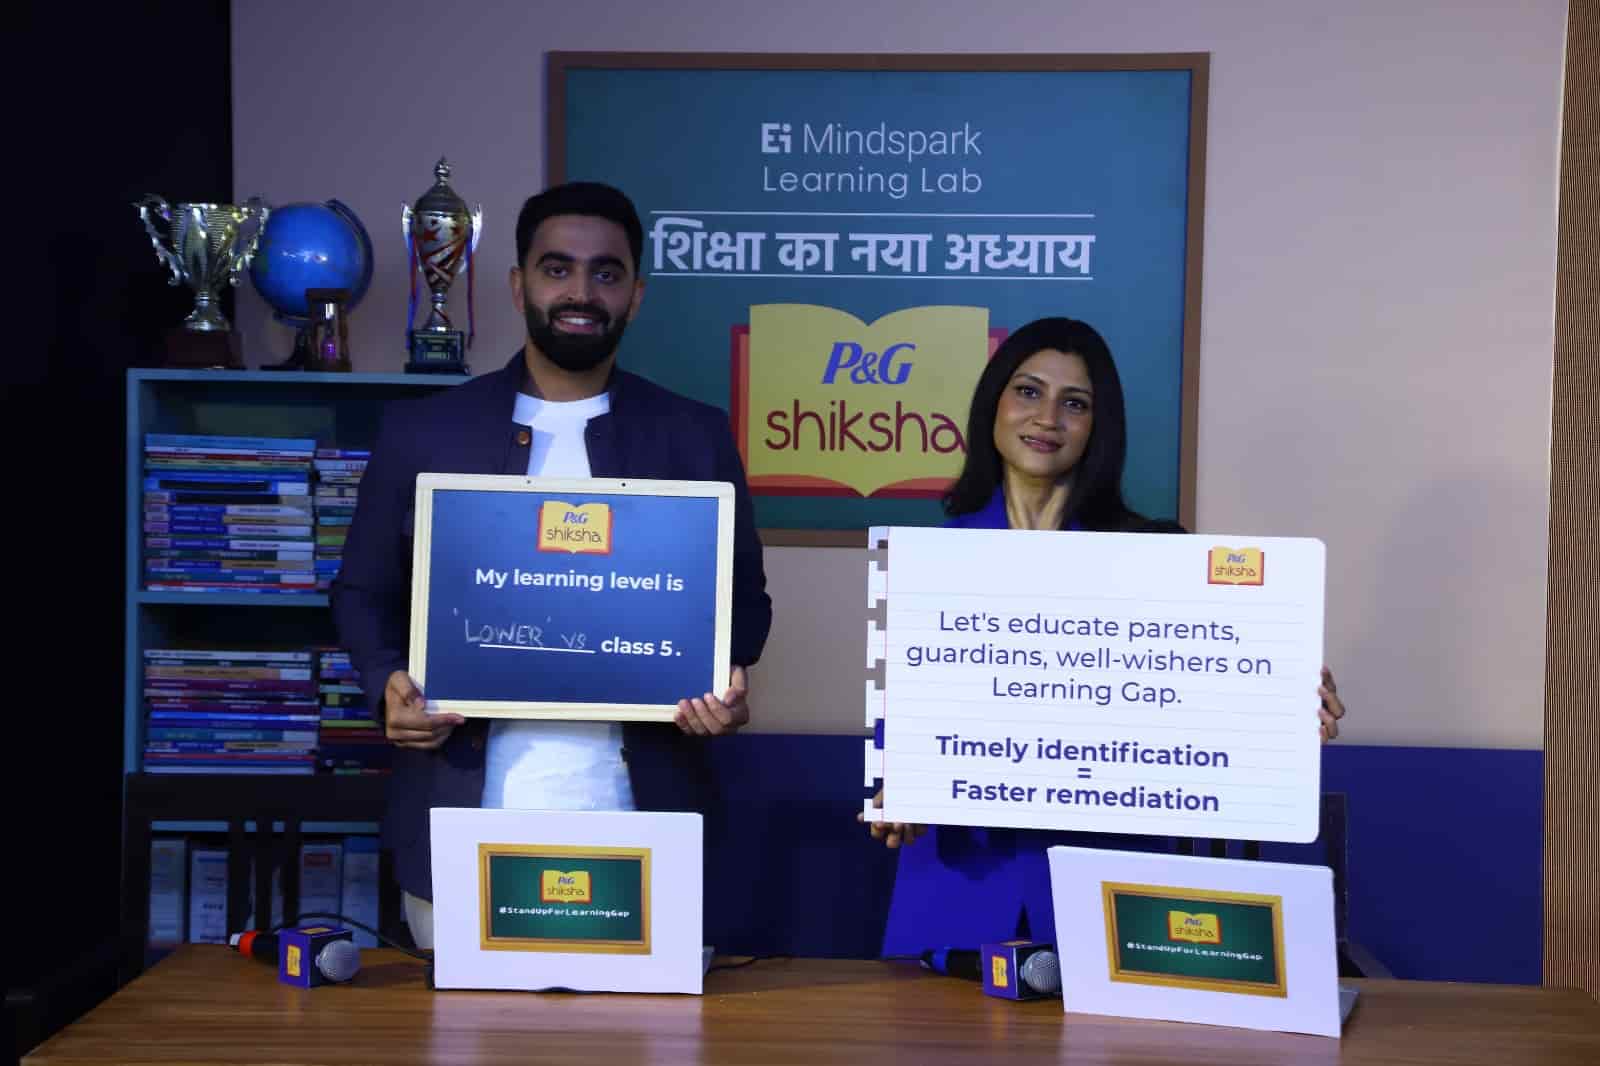 You are currently viewing Konkona Sen Sharma Joins the P&G Shiksha Movement to #StandUpForLearningGap in a Child’s Education